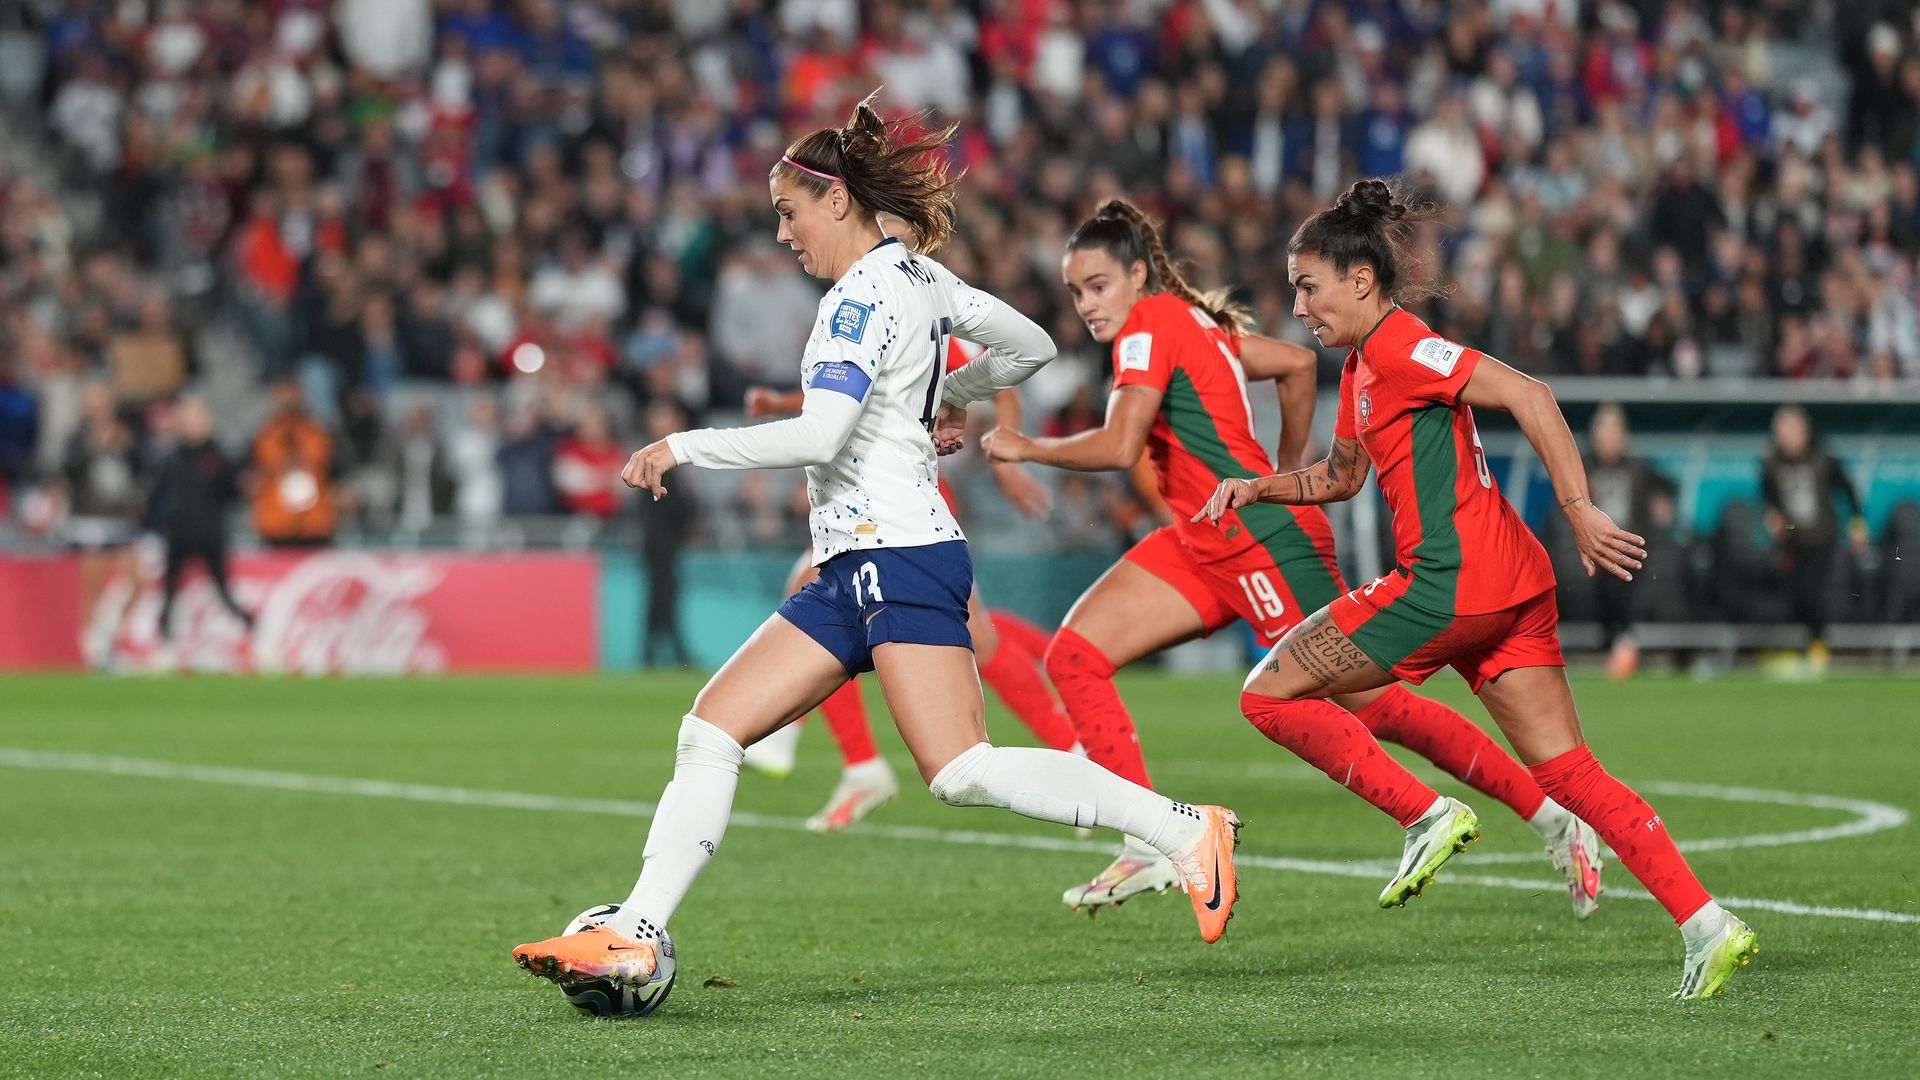 The 2019 Women's World Cup prize money is $30 million